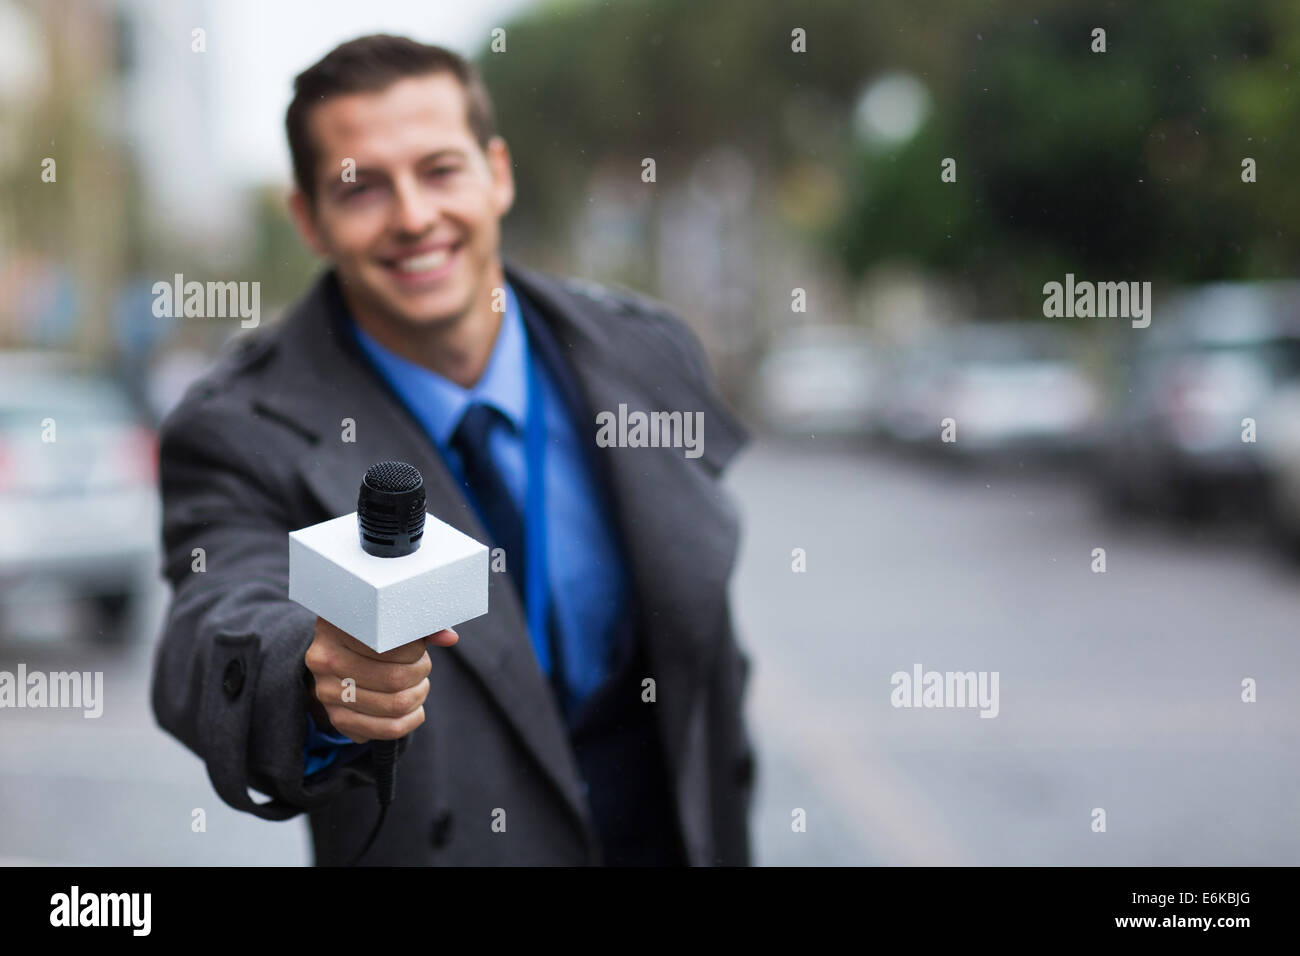 close up portrait of young journalist giving microphone Stock Photo